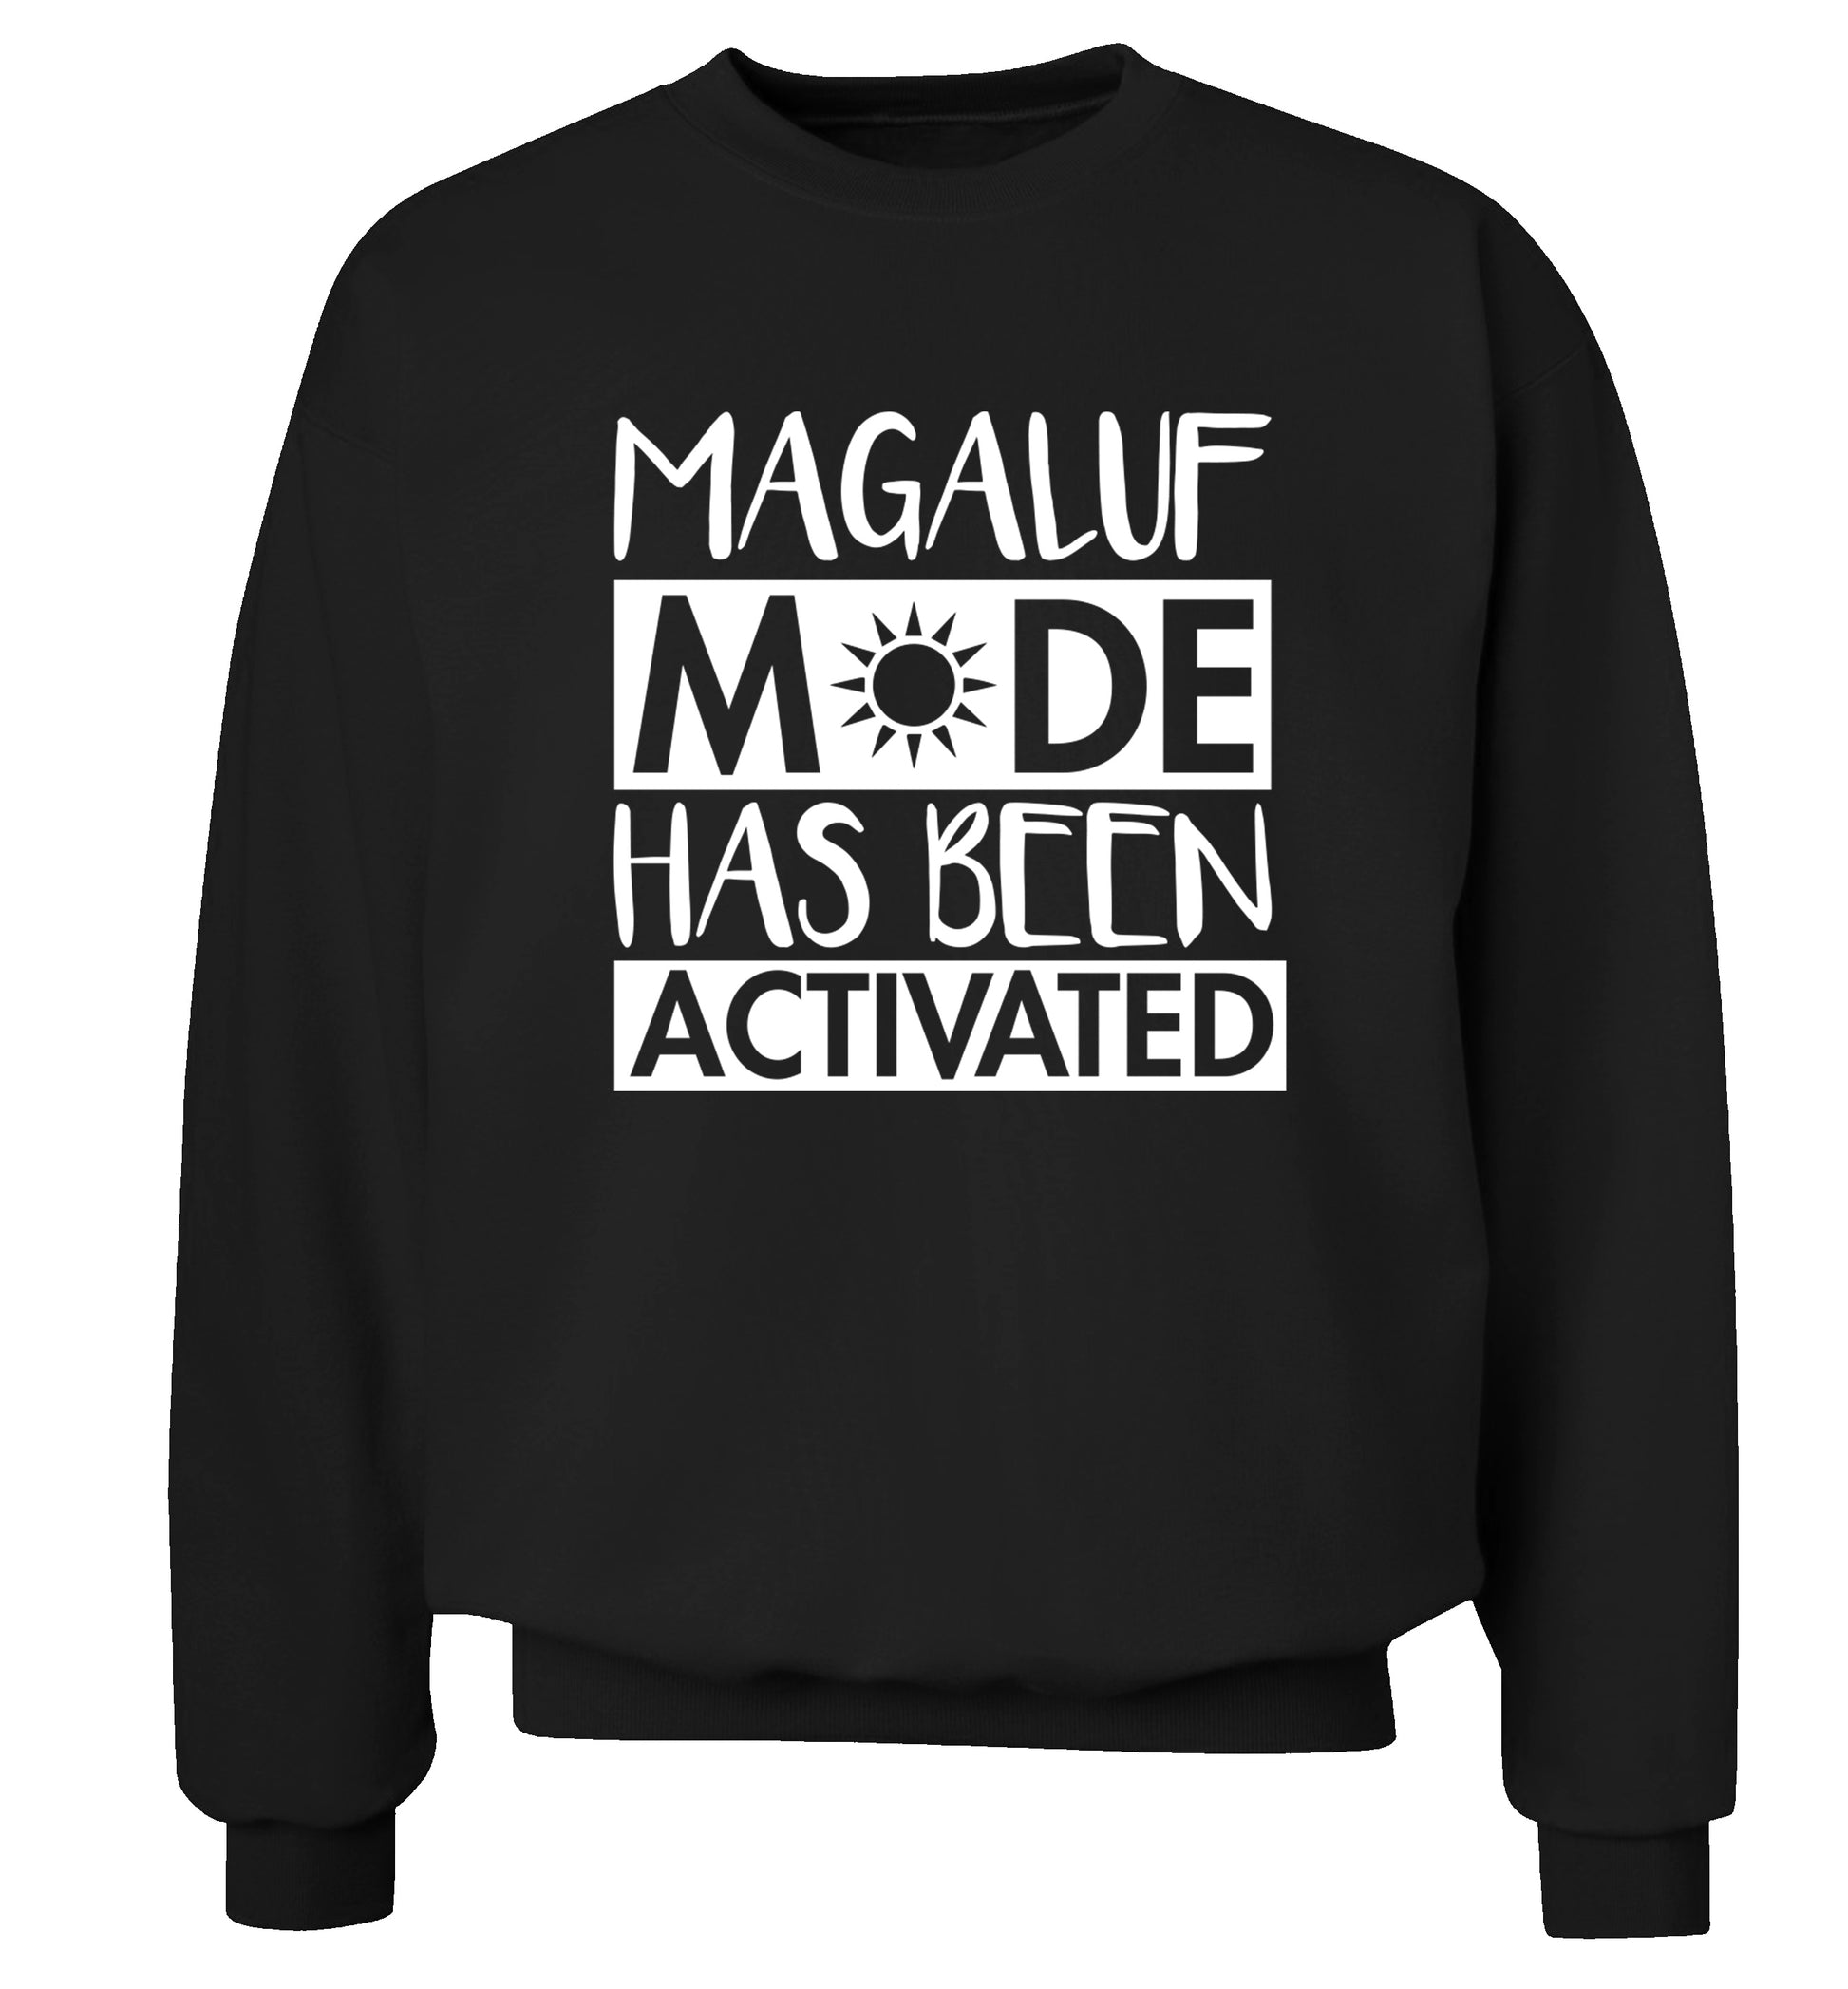 Magaluf mode has been activated Adult's unisex black Sweater 2XL